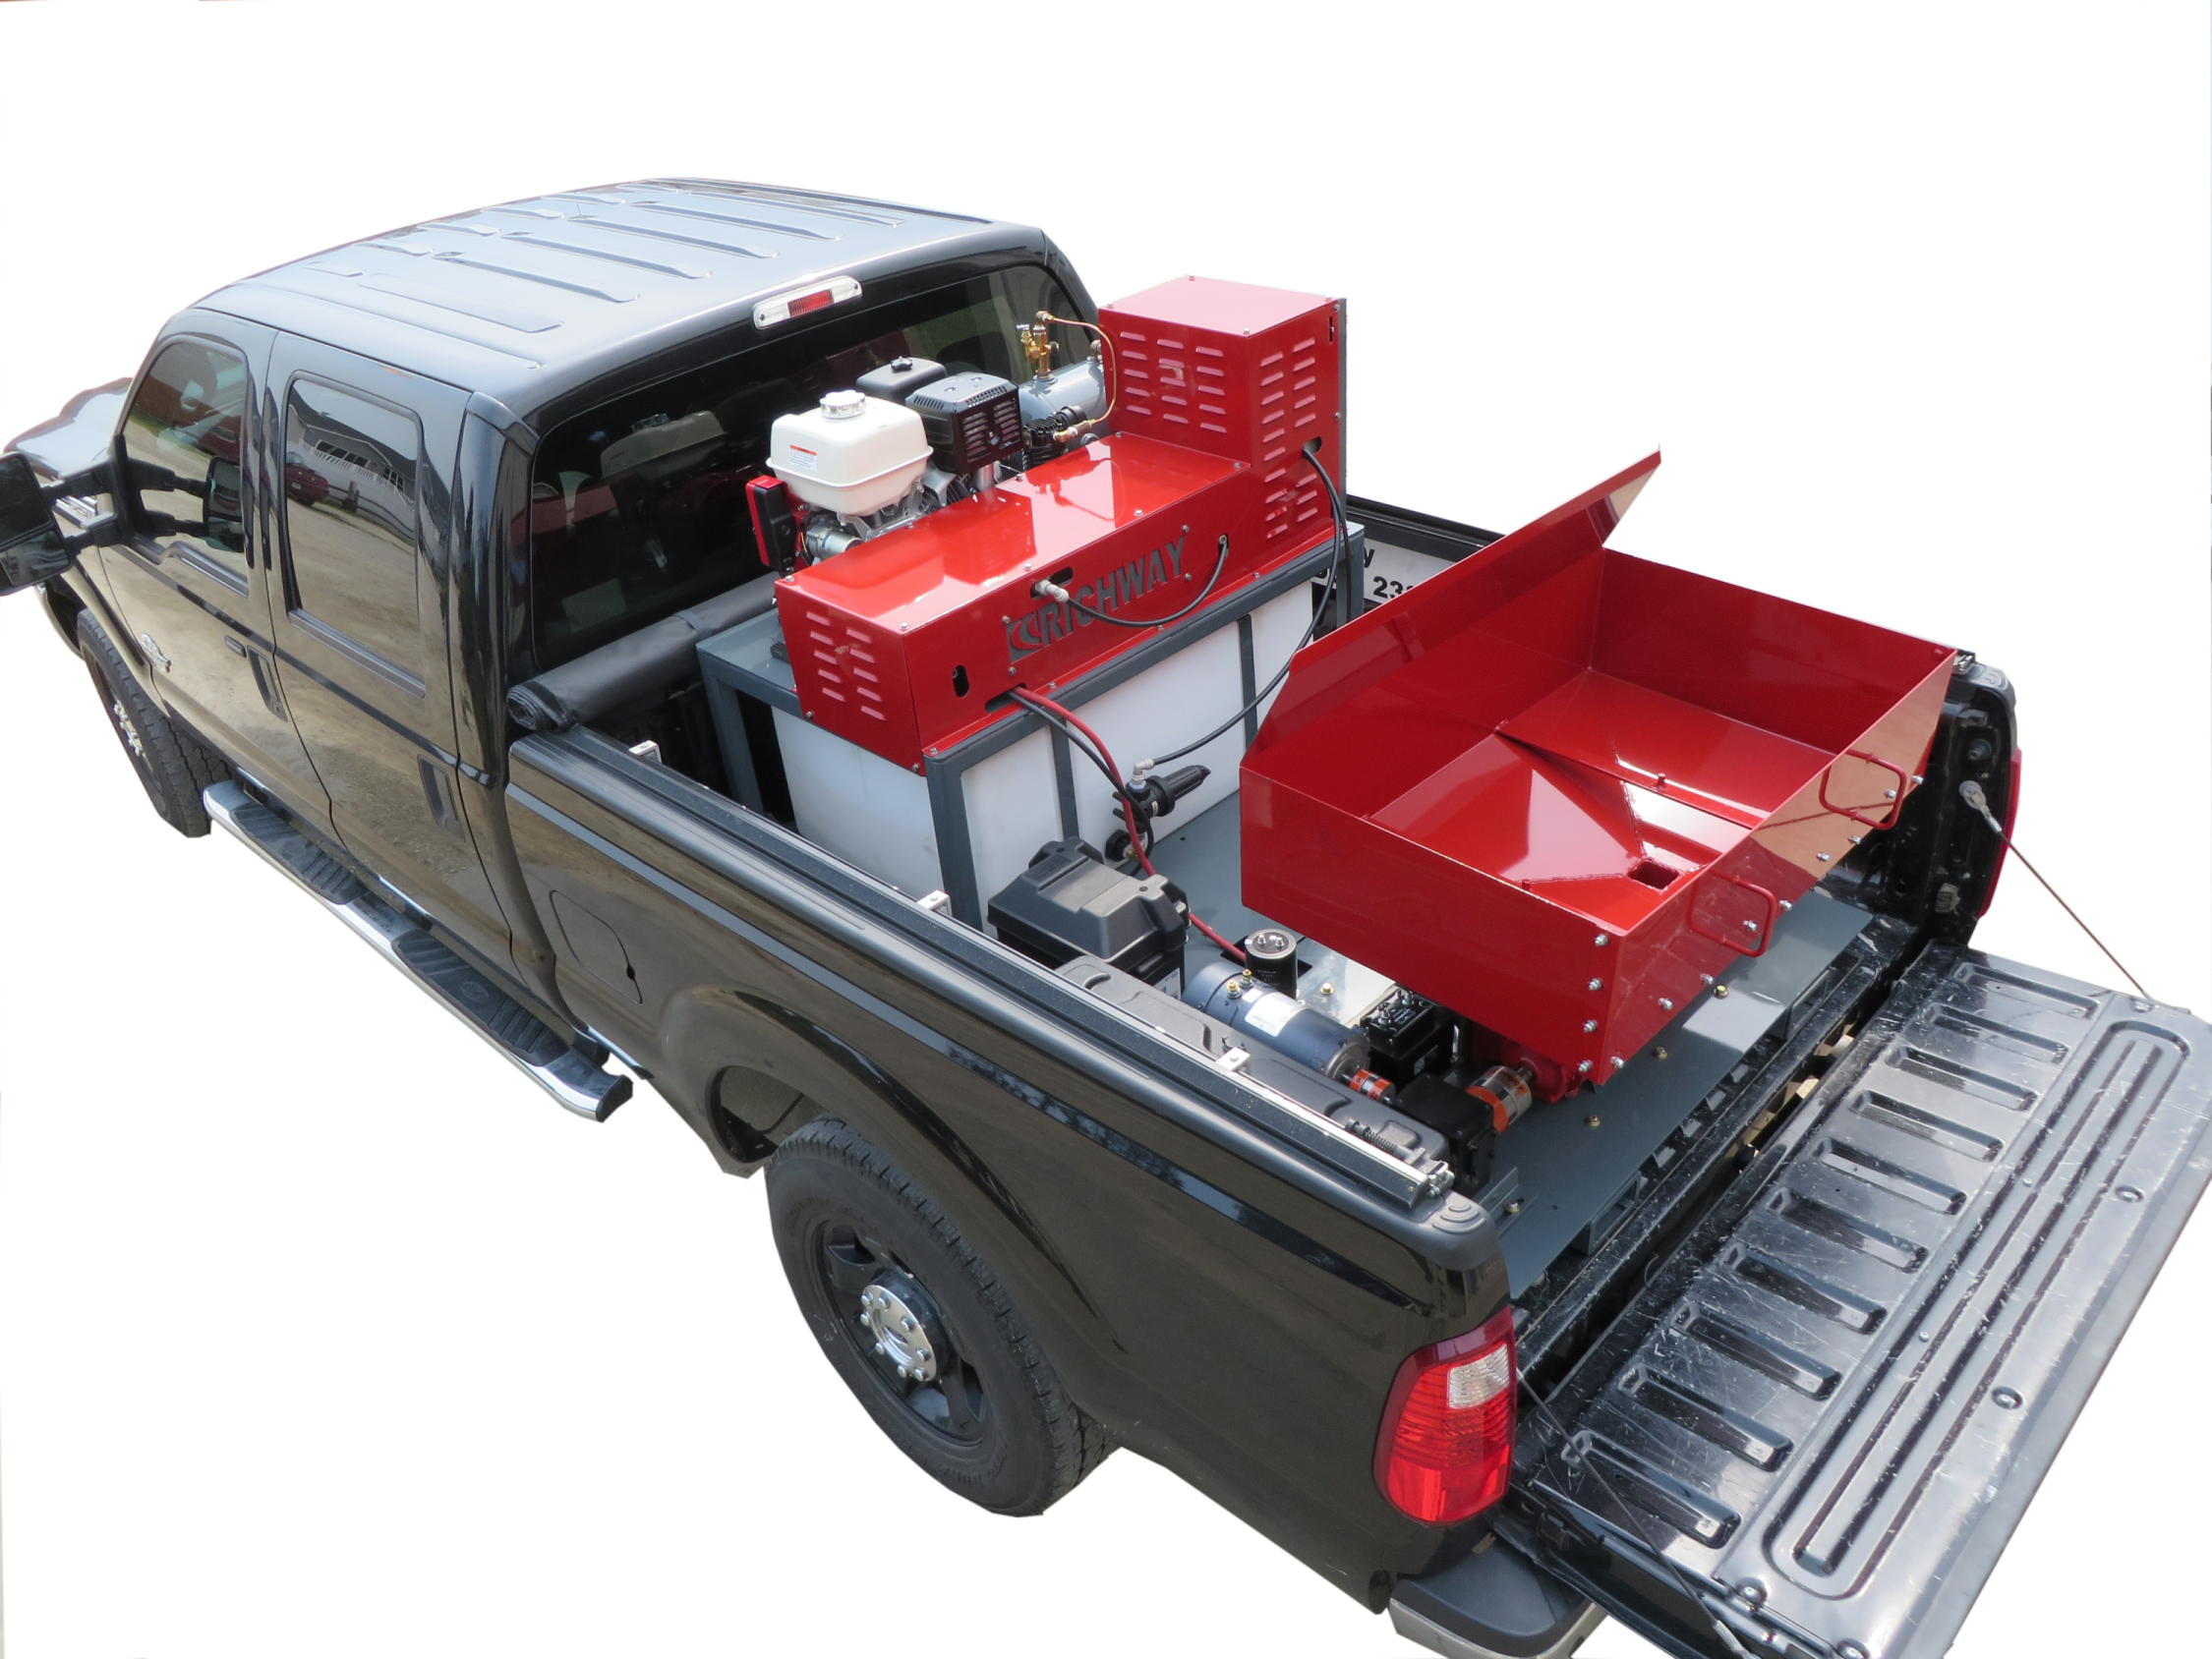 Production of up to 6 cubic yards an hour of cellular concrete on a continuous basis is now possible with the new CretefoamerTM Model CS-6G which fits in a 3/4 ton pickup truck.